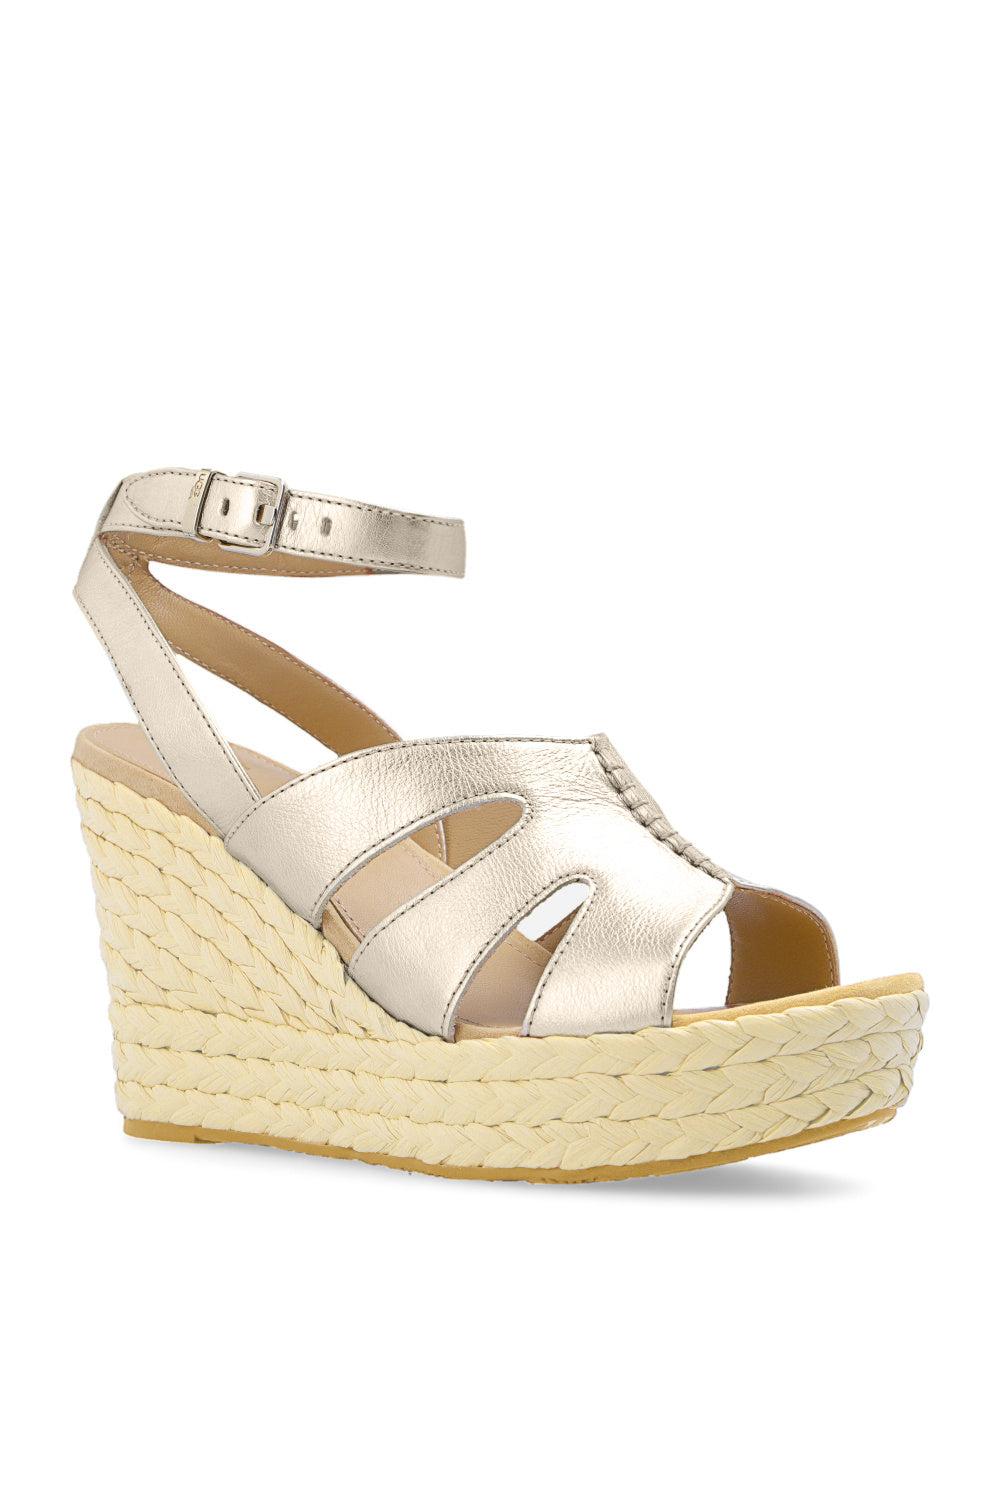 UGG Gold 'careena' Wedge Sandals in Natural | Lyst